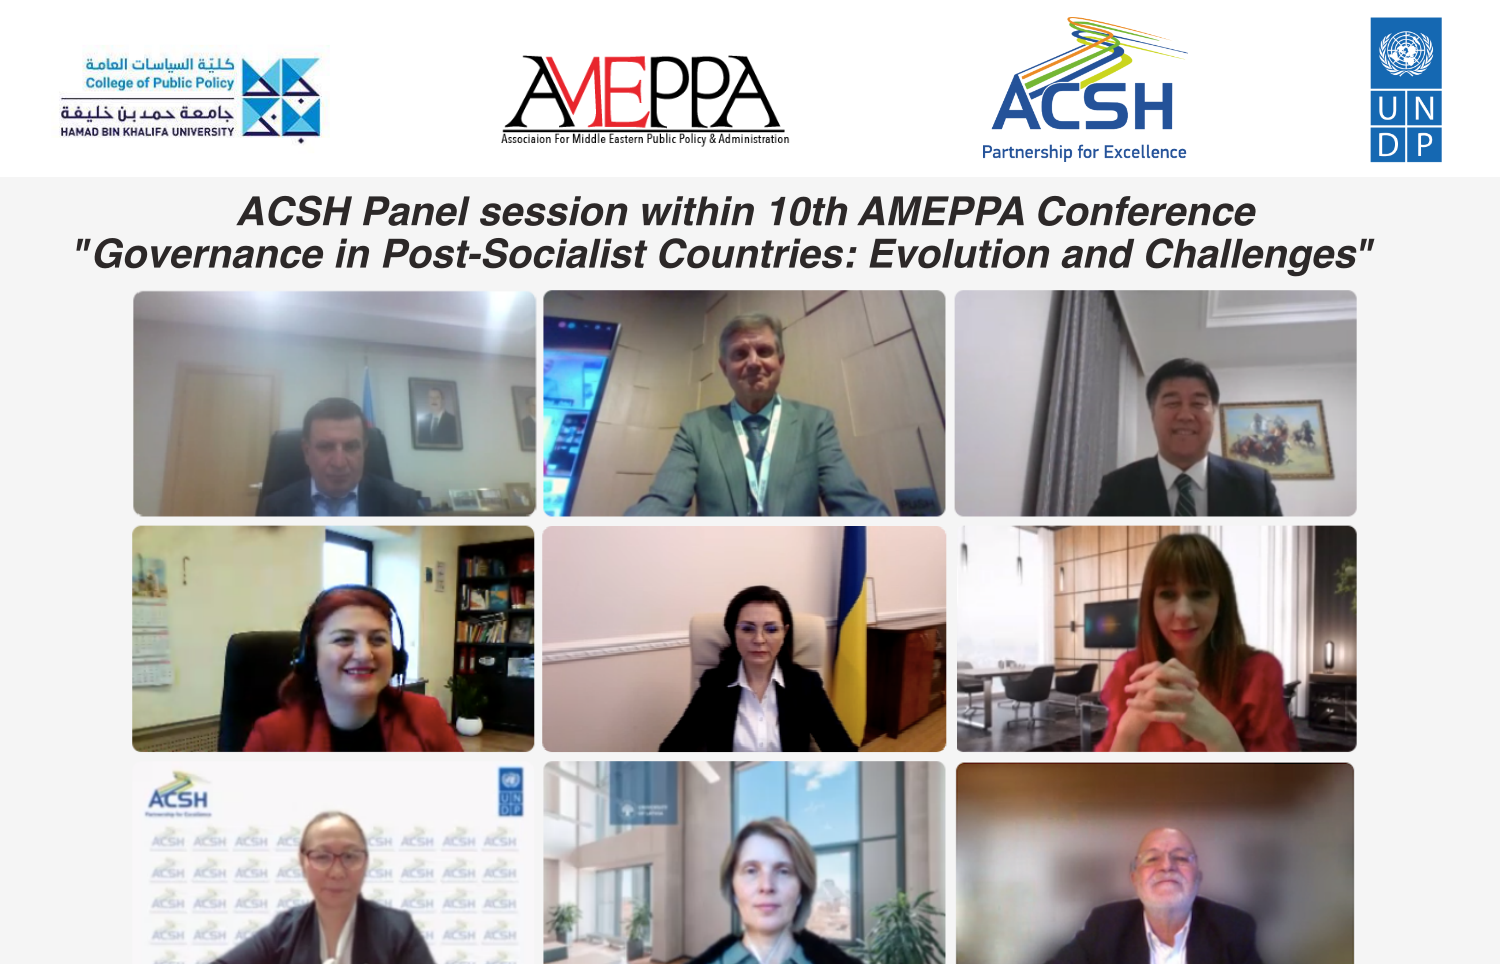 Evolution and challenges of effective governance in post-socialist countries was discussed at the ACSH panel session within the AMEPPA Conference